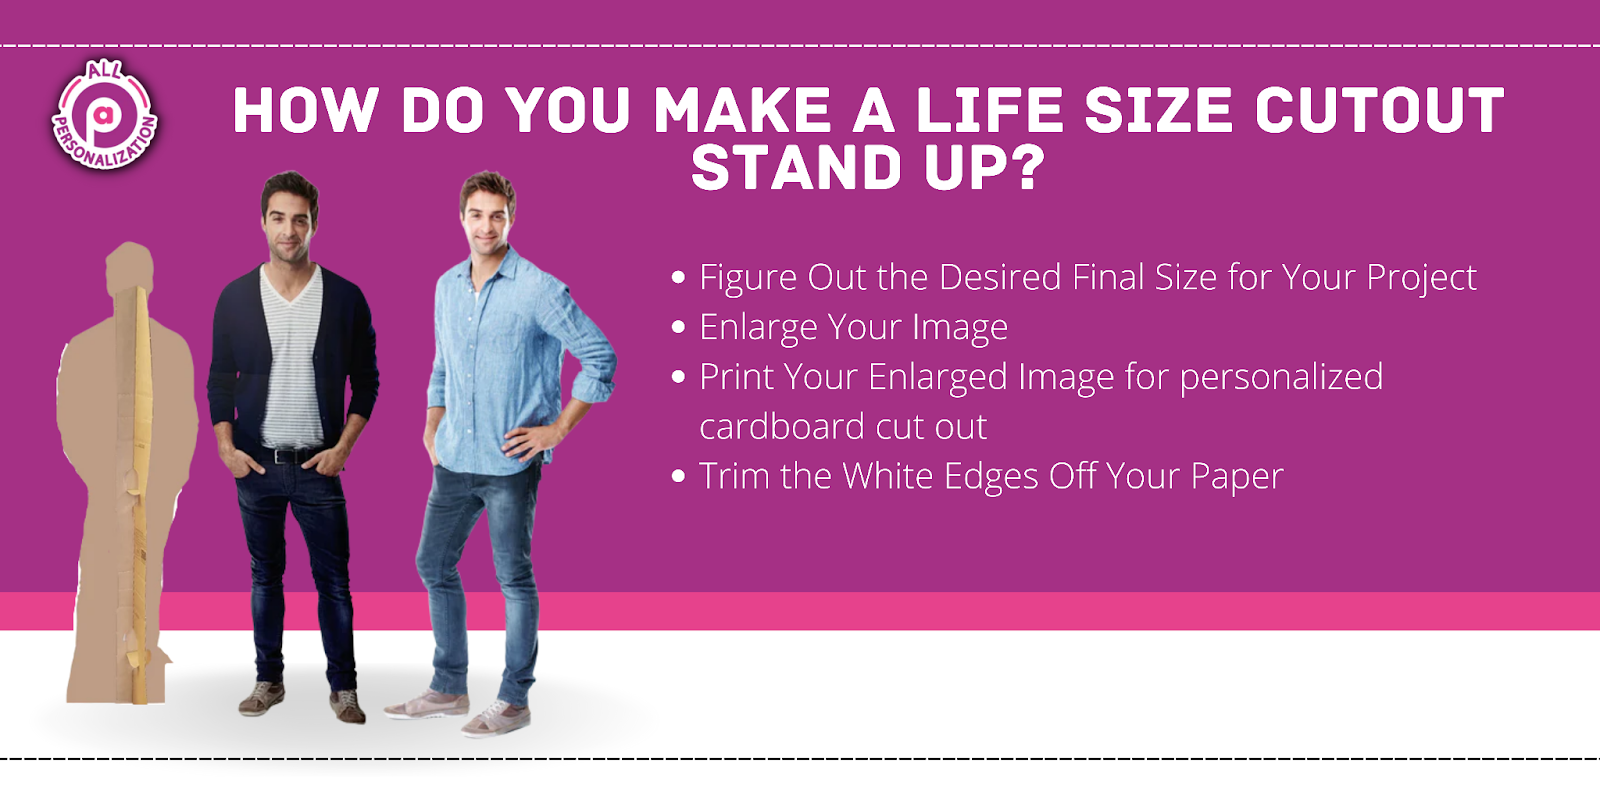 How Do You Make A Life Size Cutout Stand Up?